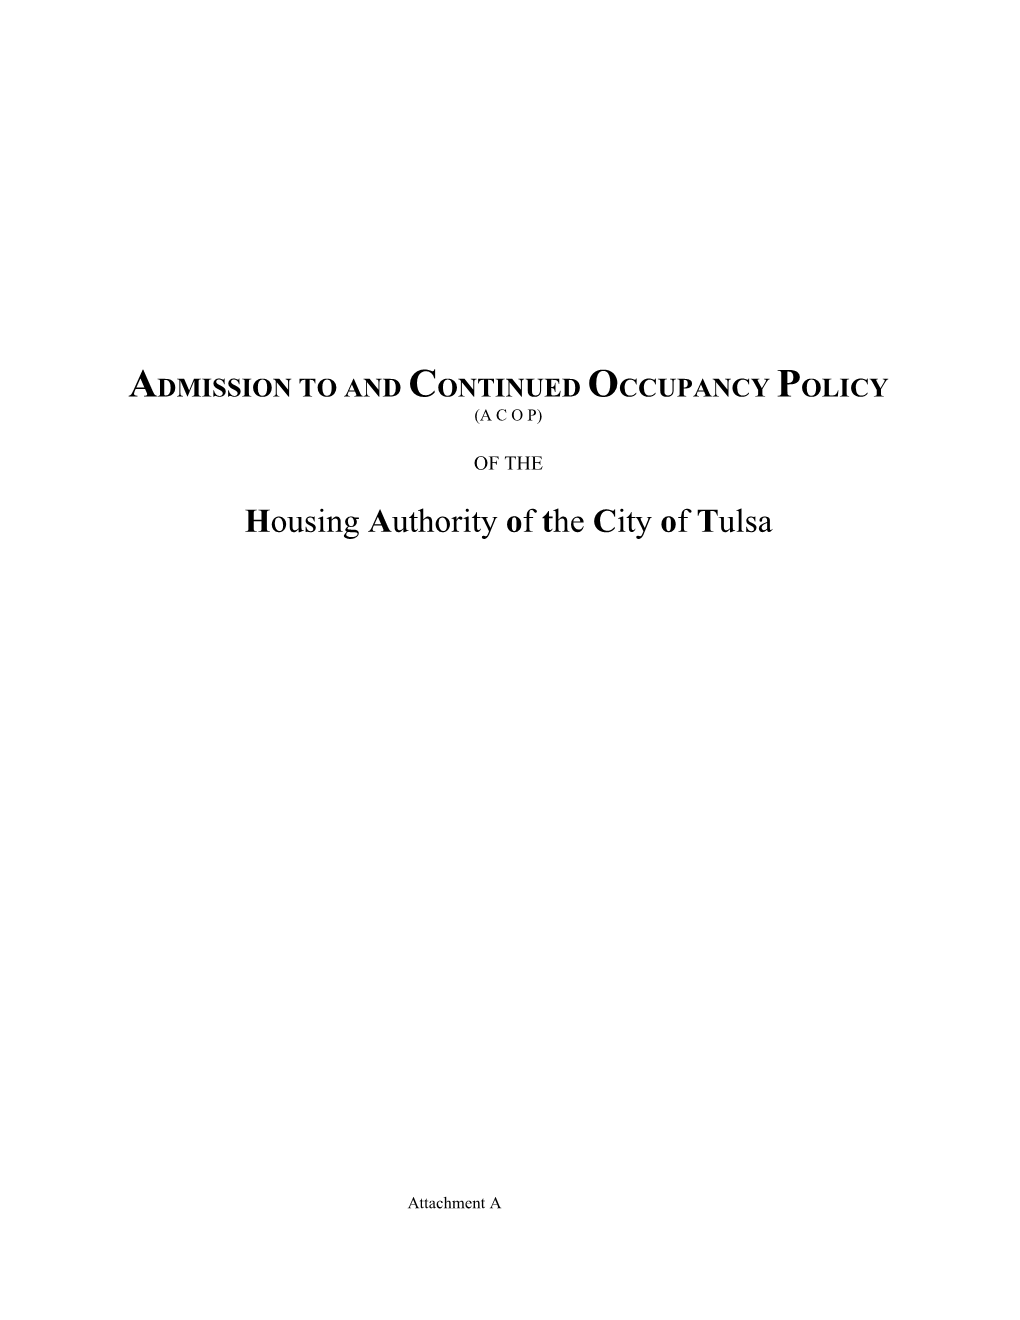 Housing Authority of the City of Tulsa